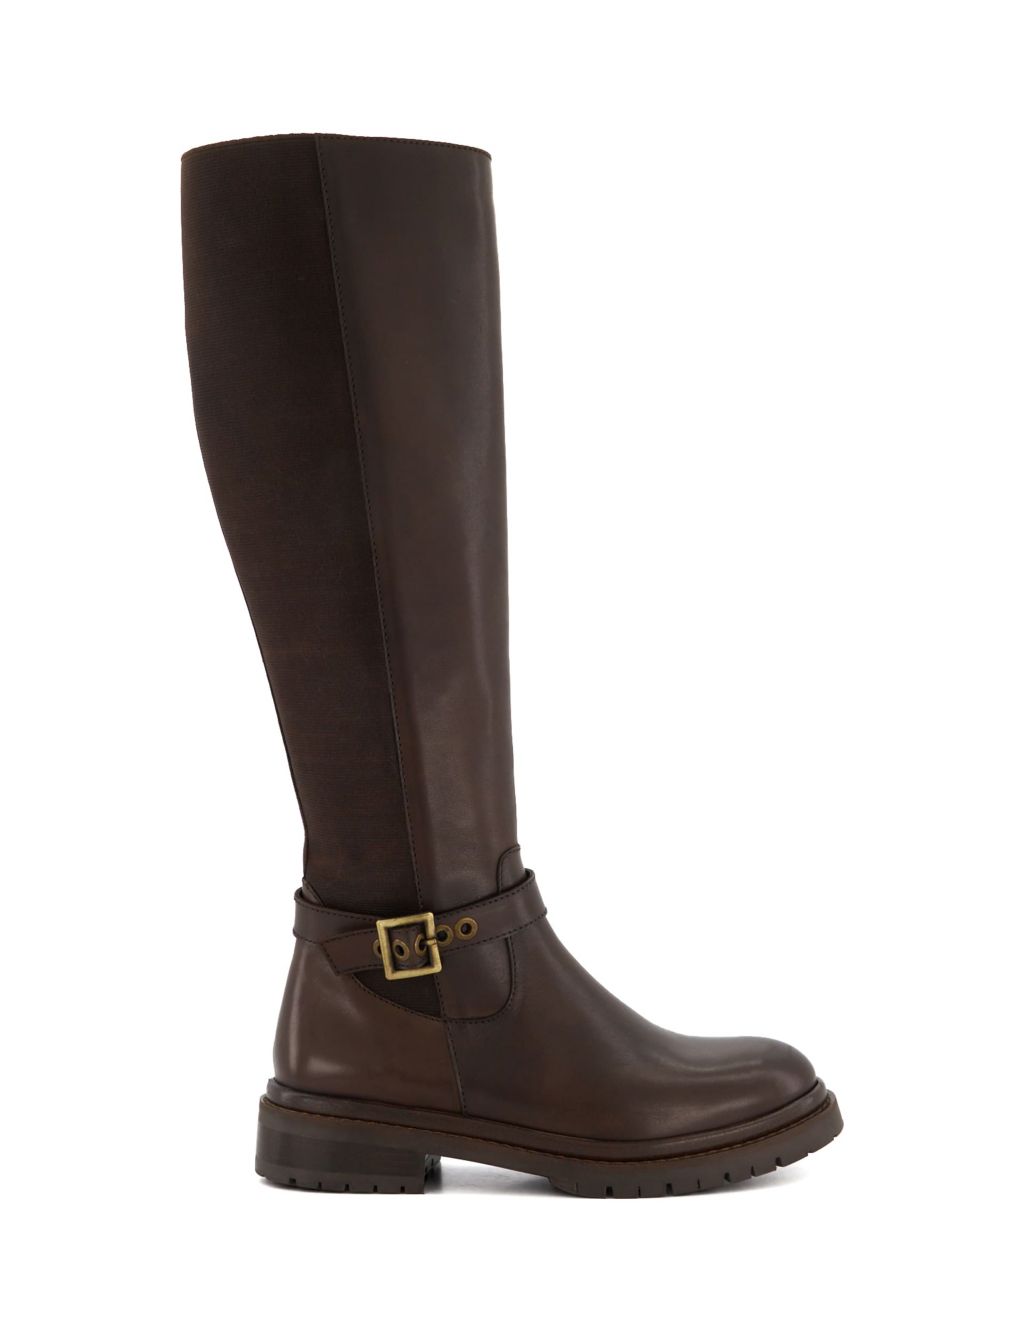 Leather Buckle Flat Knee High Boots